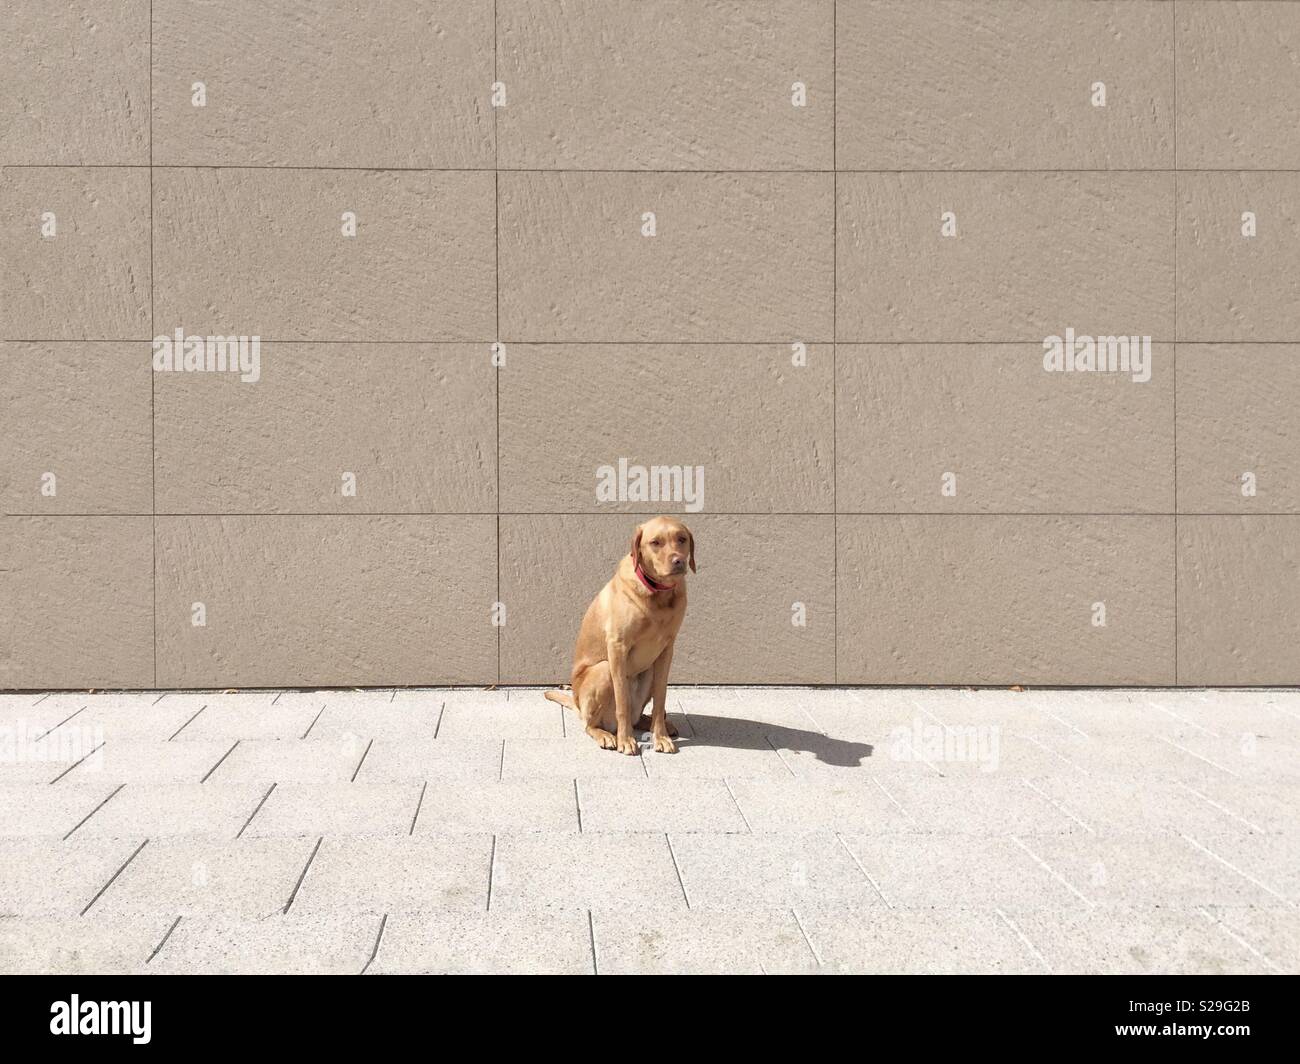 An abandoned Labrador retriever dog sitting alone in an urban environment with copy space Stock Photo